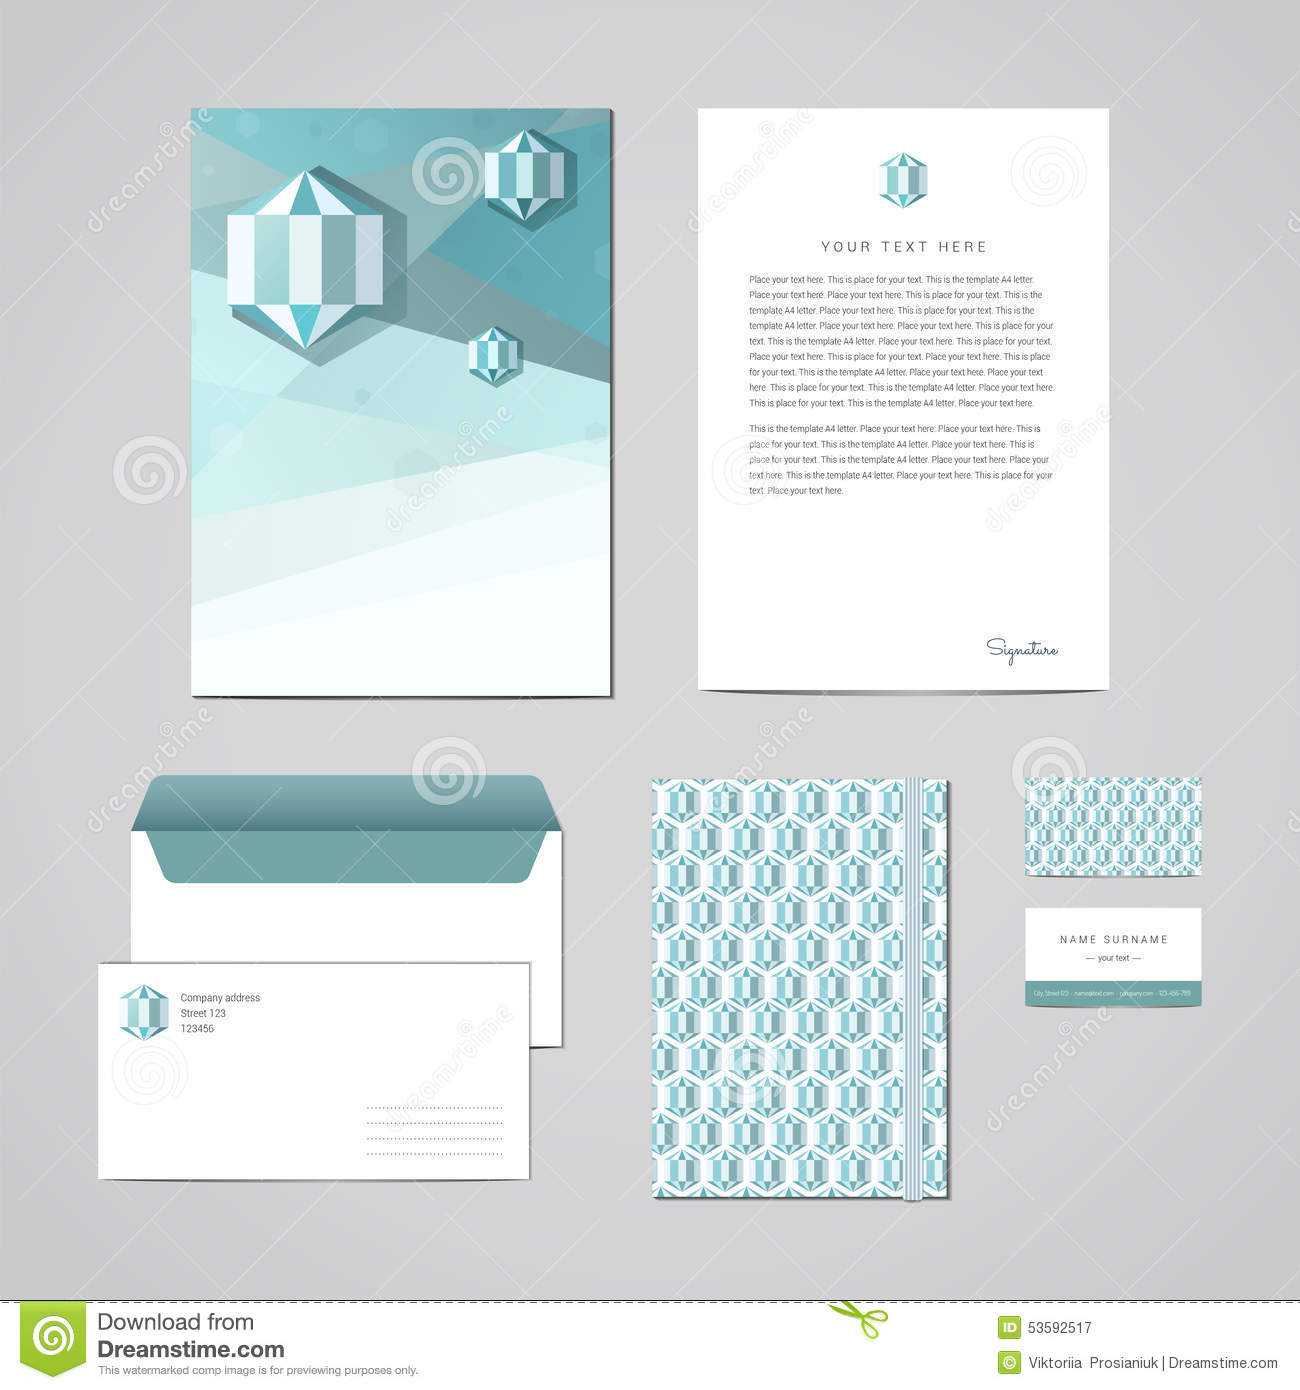 Corporate Identity Design Template. Documentation For In Business Card Letterhead Envelope Template